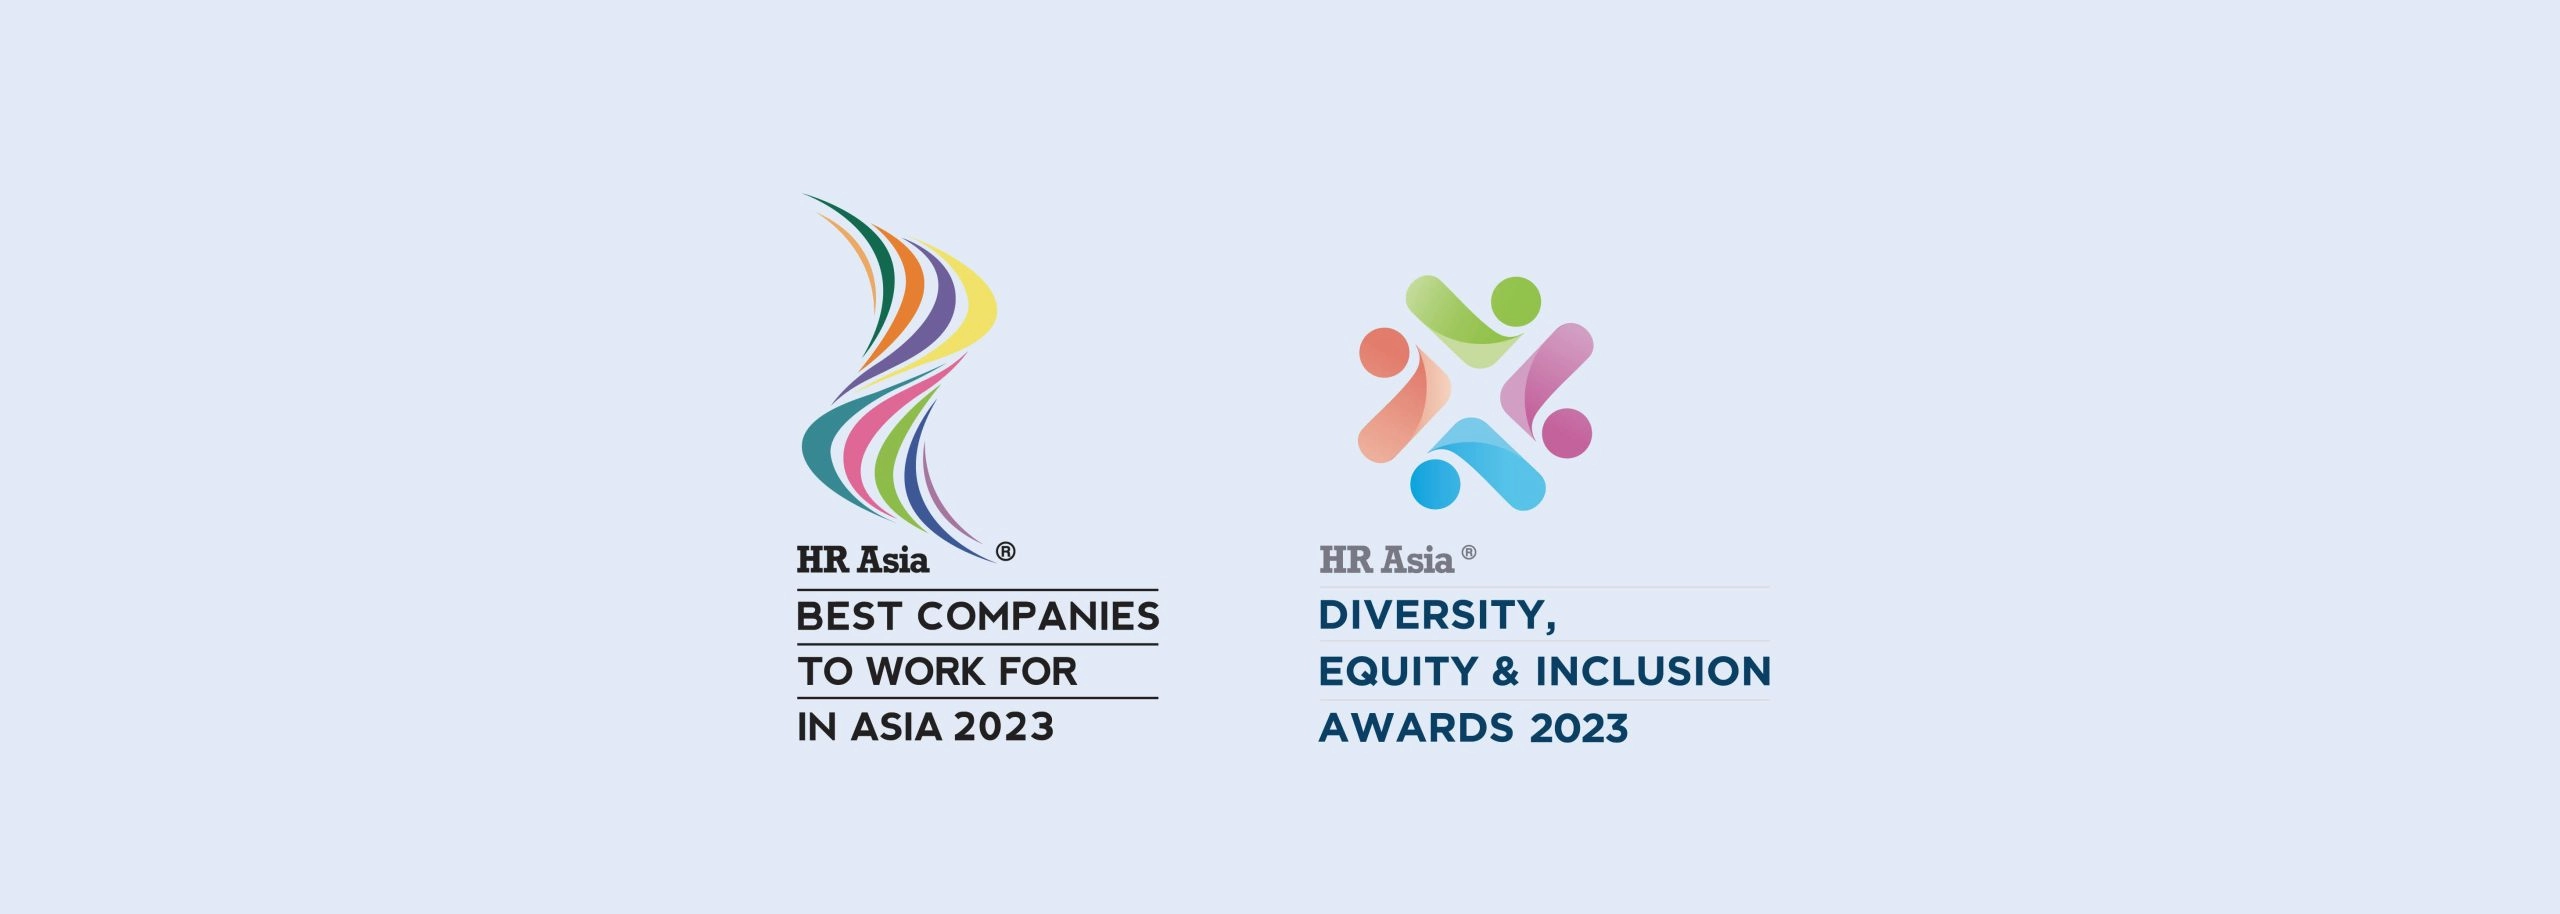 Startek® Philippines earns prestigious awards for workplace excellence and diversity initiatives